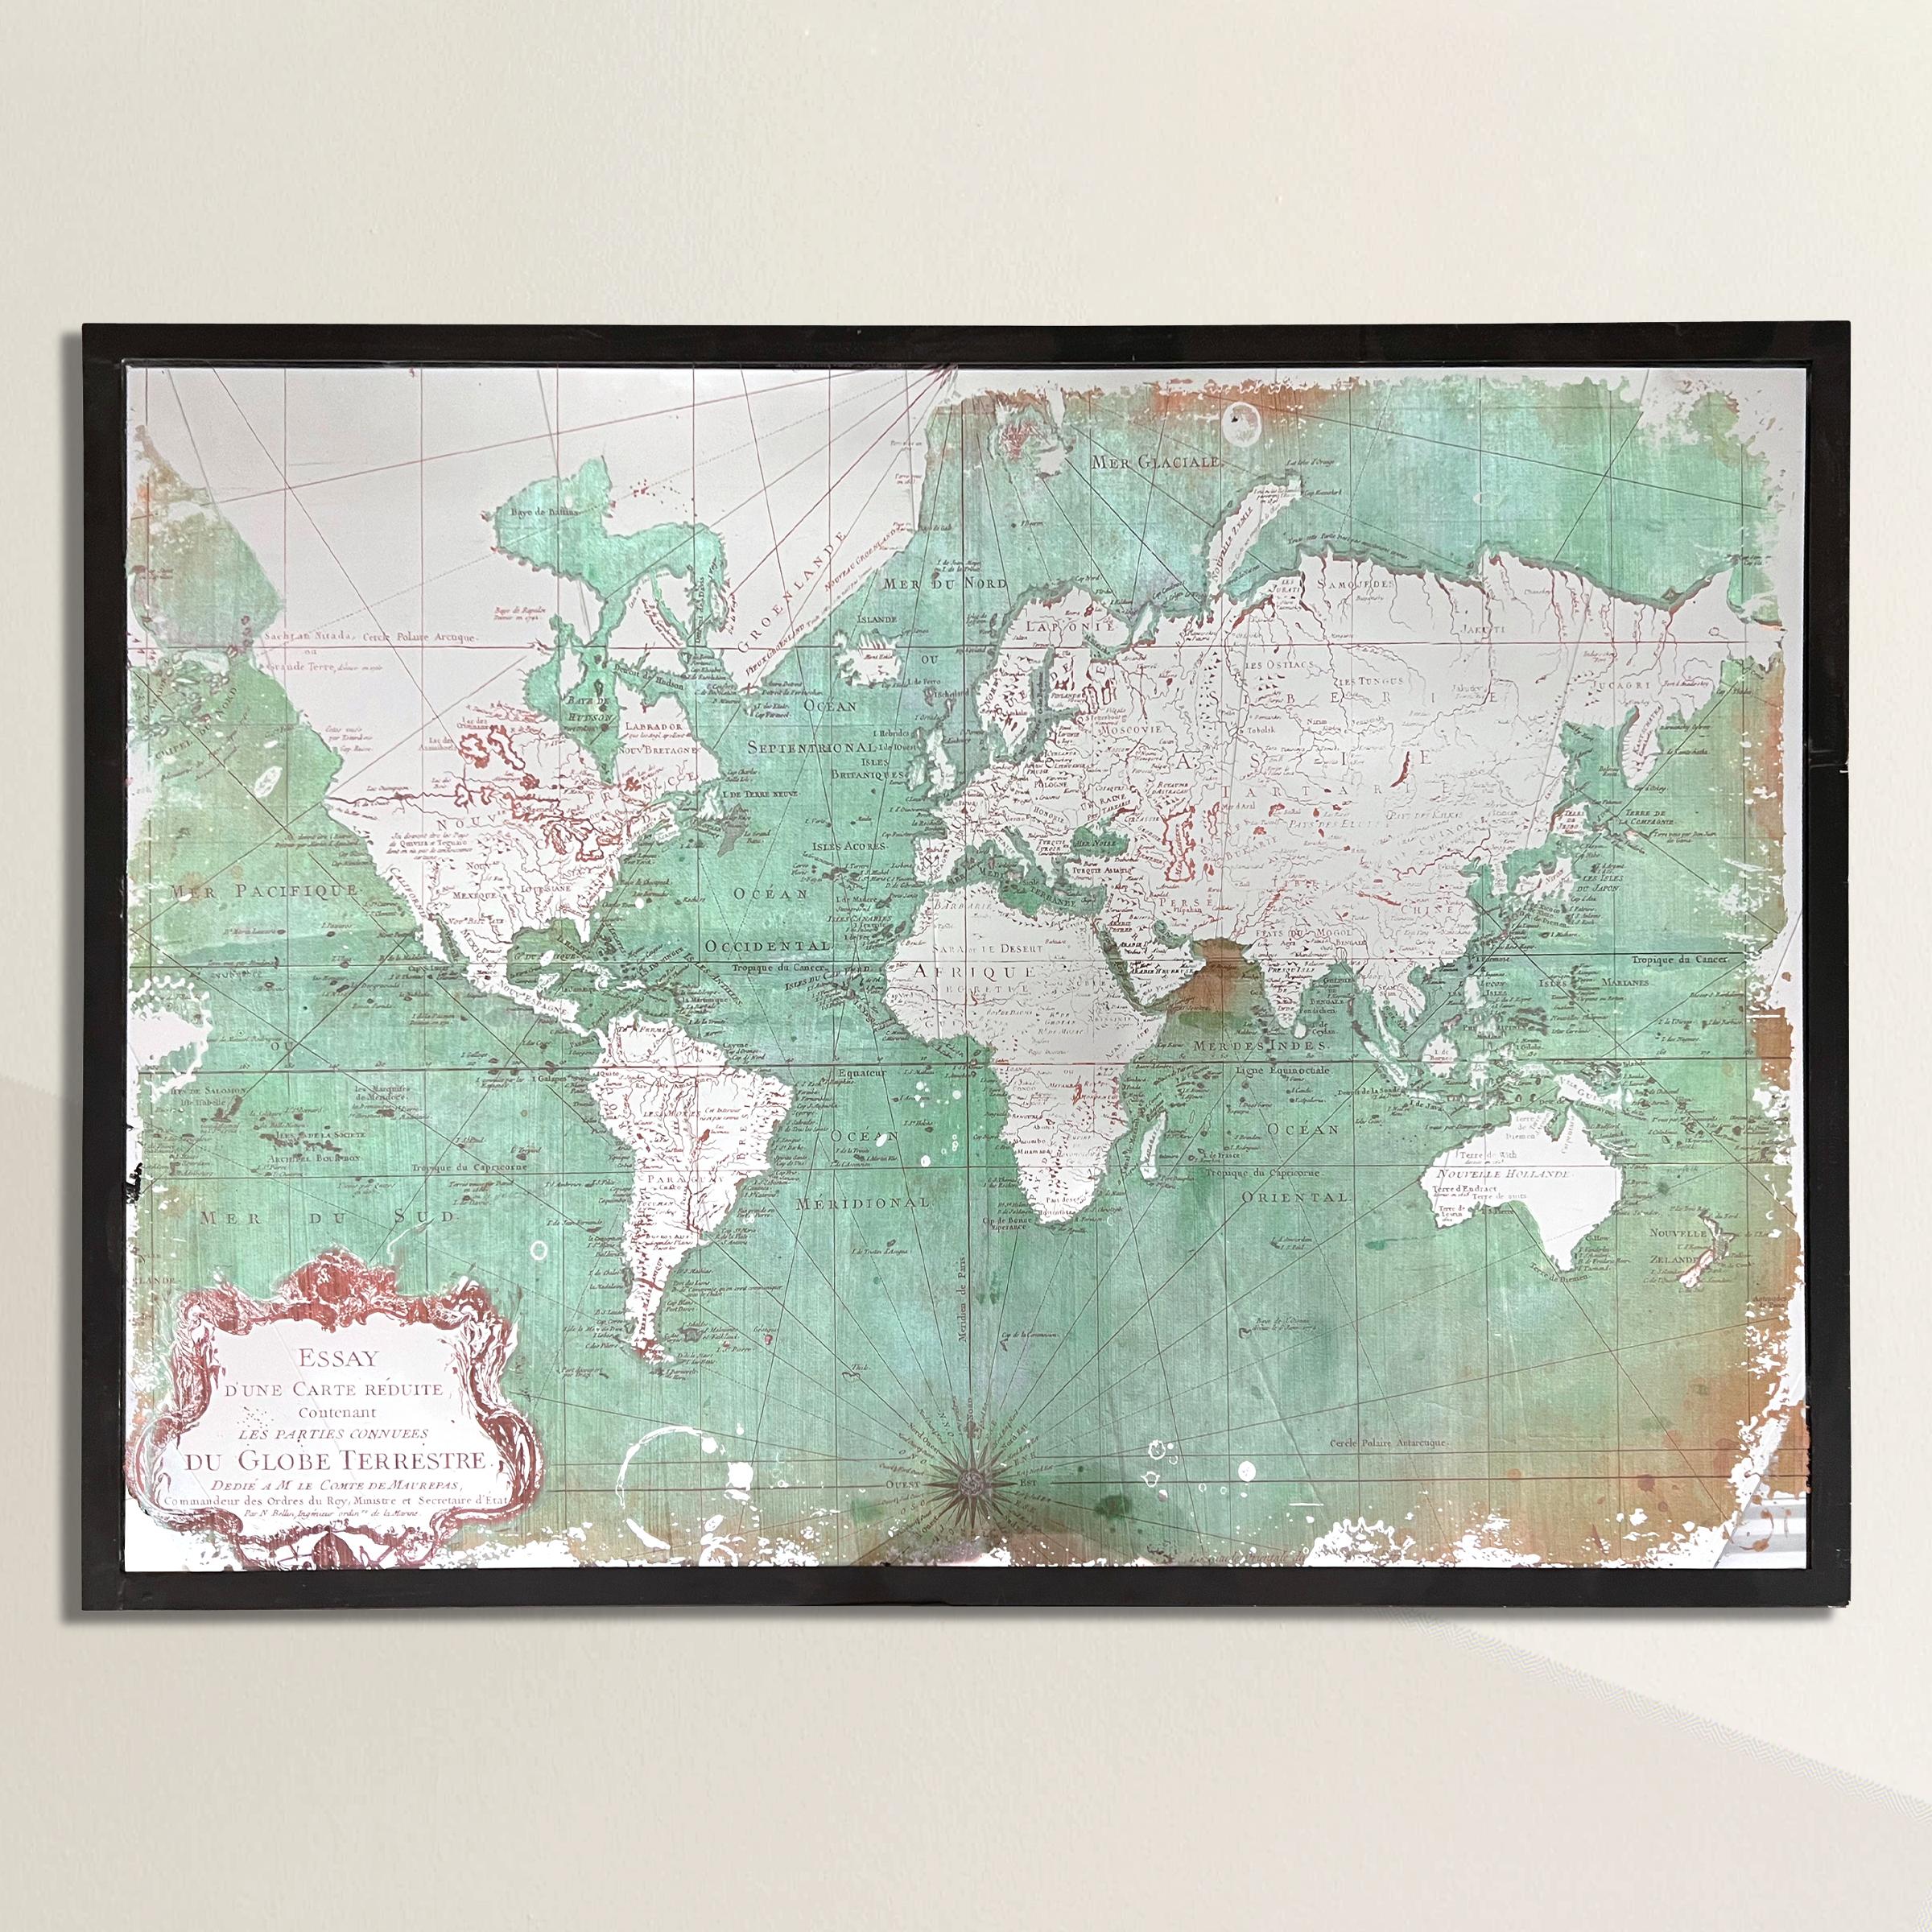 A 21st century American steel-framed world map mirror—an exquisite fusion of functionality and artistry that adds a touch of wanderlust to any space. This meticulously crafted mirror features an 18th century French world map with mirrored